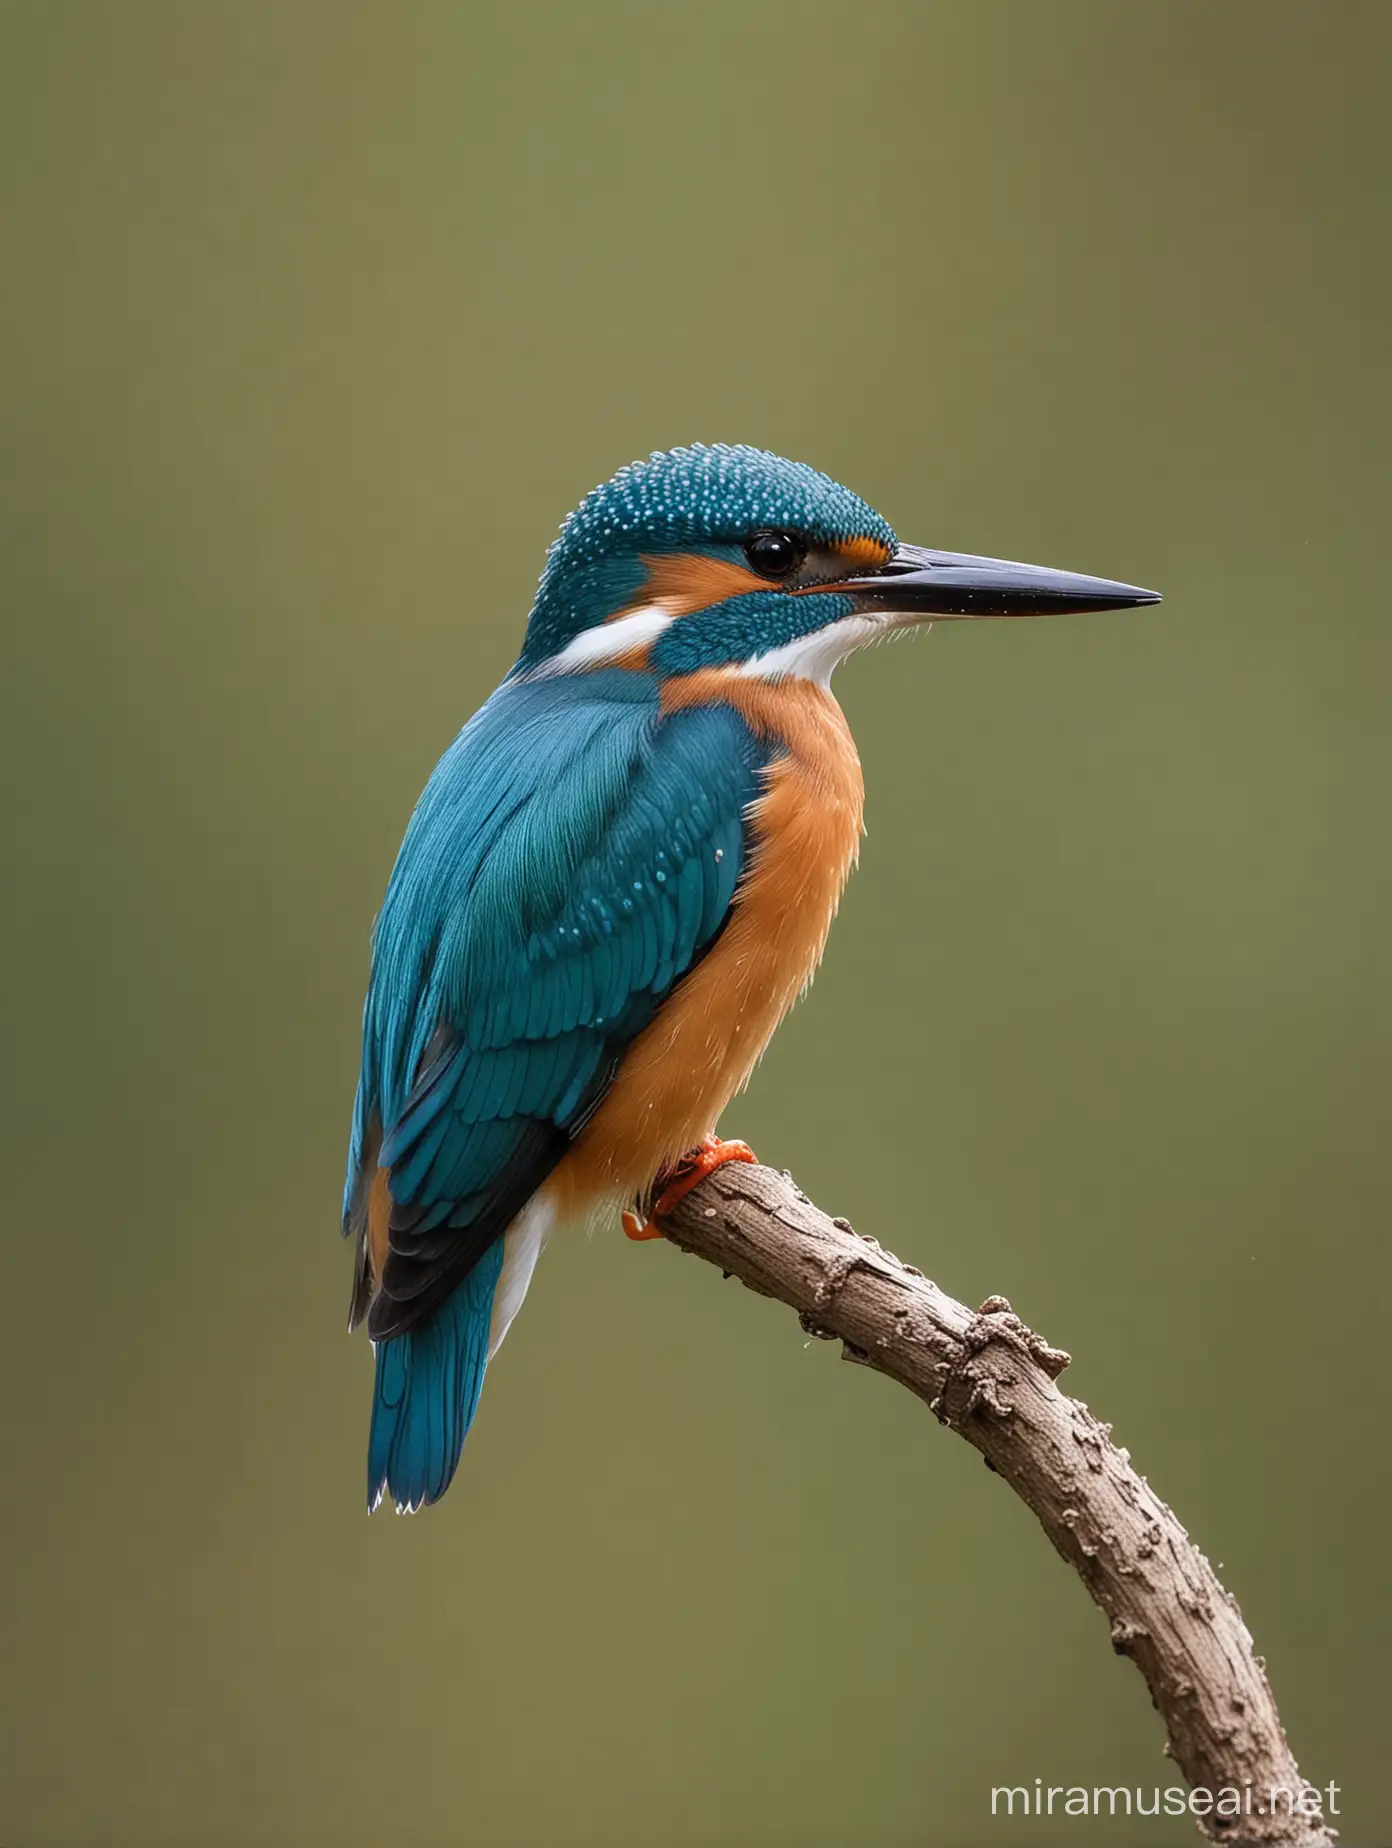 Vibrant Eleonoras Kingfisher Bird Perched on a Branch